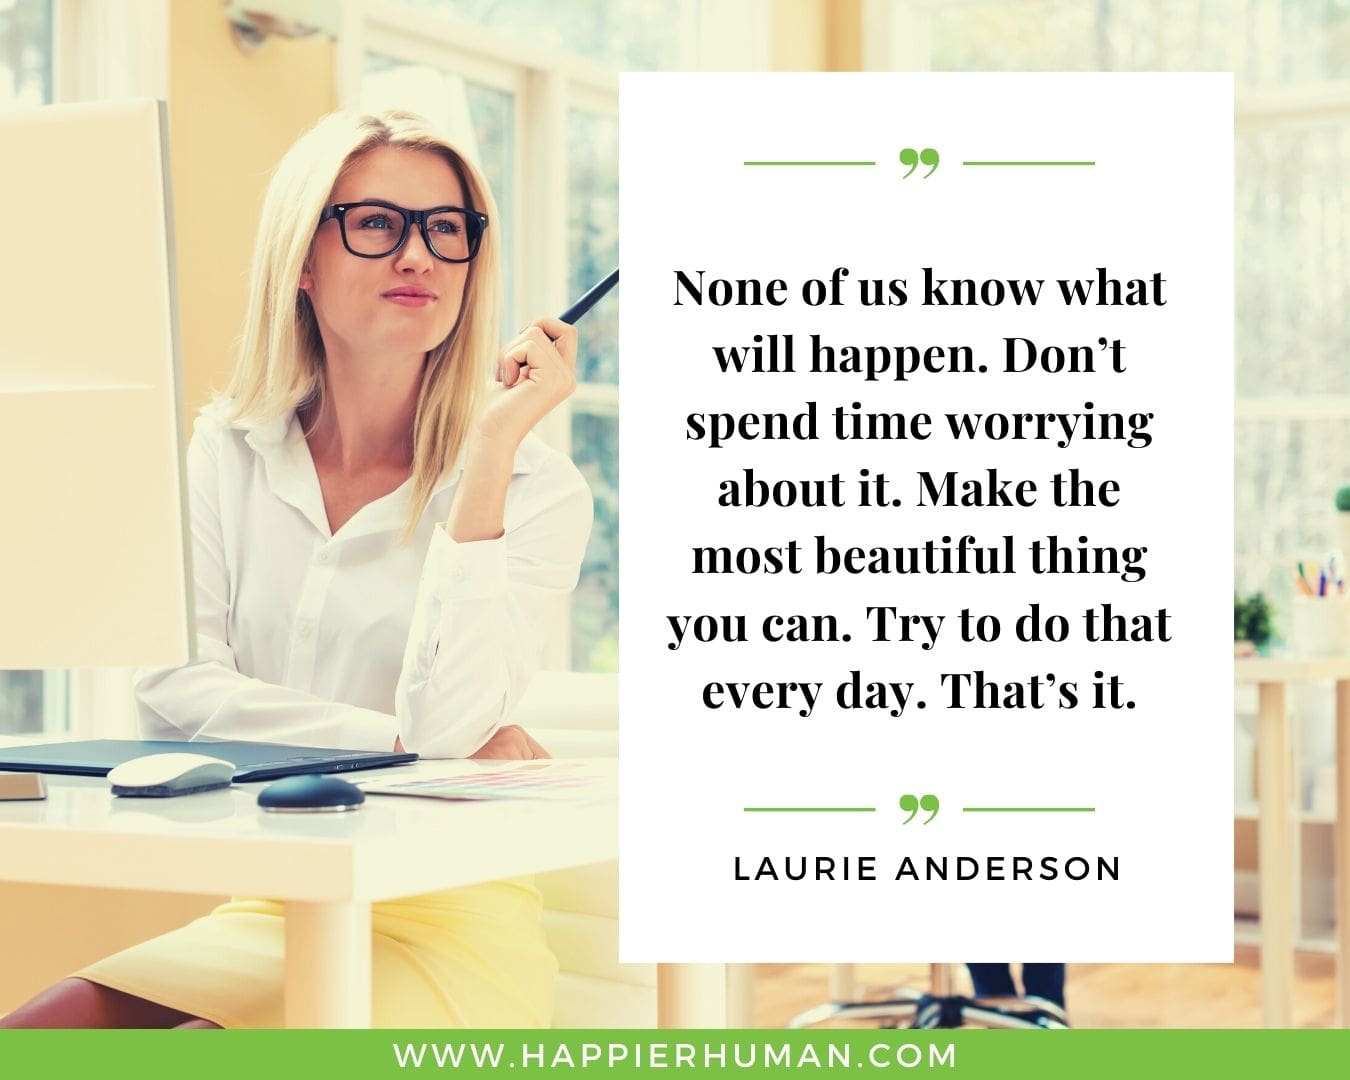 Great Day Quotes - “None of us know what will happen. Don’t spend time worrying about it. Make the most beautiful thing you can. Try to do that every day. That’s it.” – Laurie Anderson